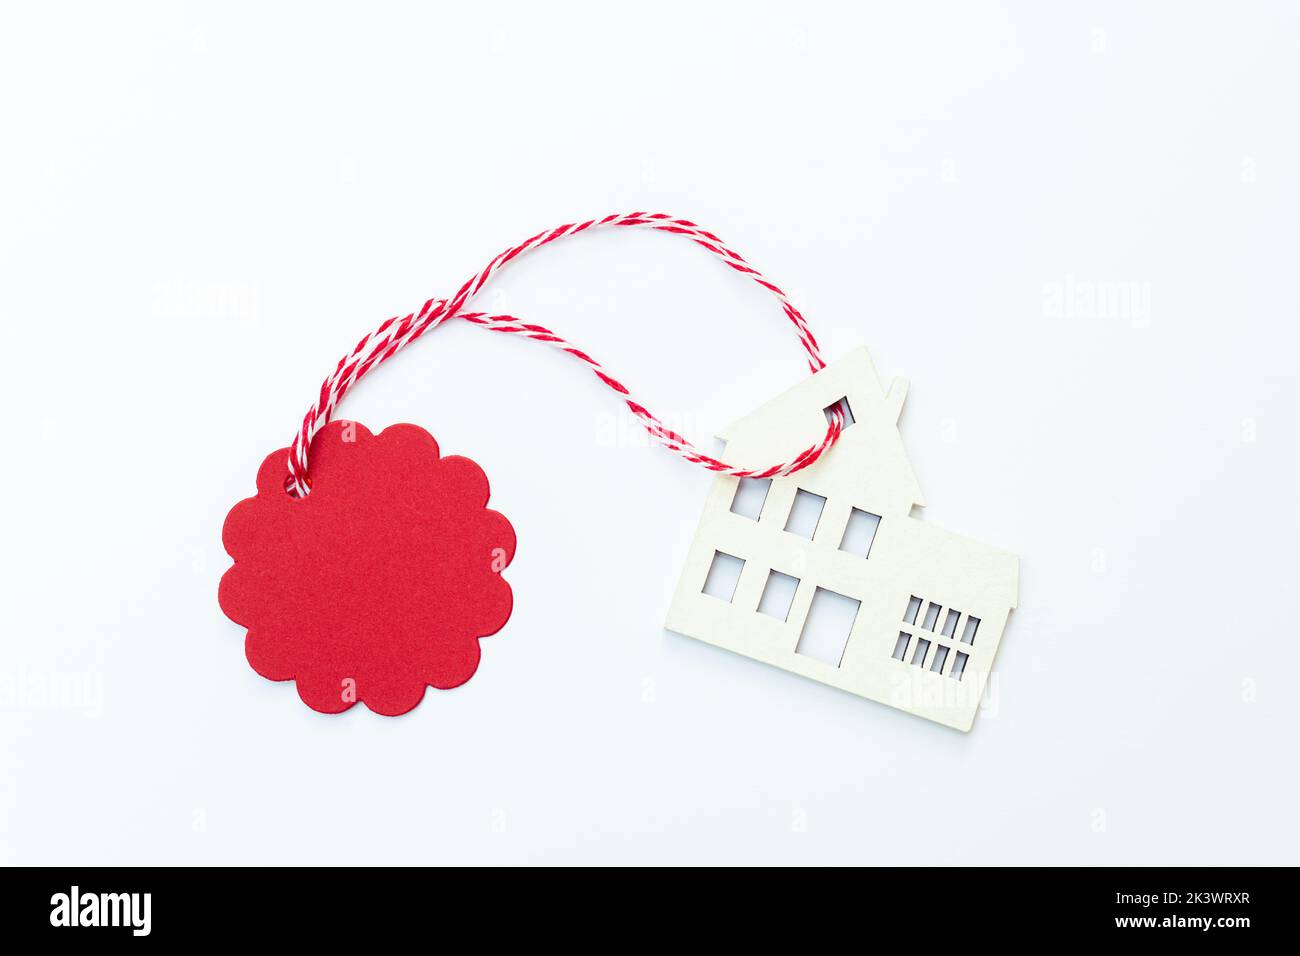 House for buy or rent label on winter holidays. Wooden house symbol with tag on white background. Real estate, rental housing, rent for christmas holi Stock Photo